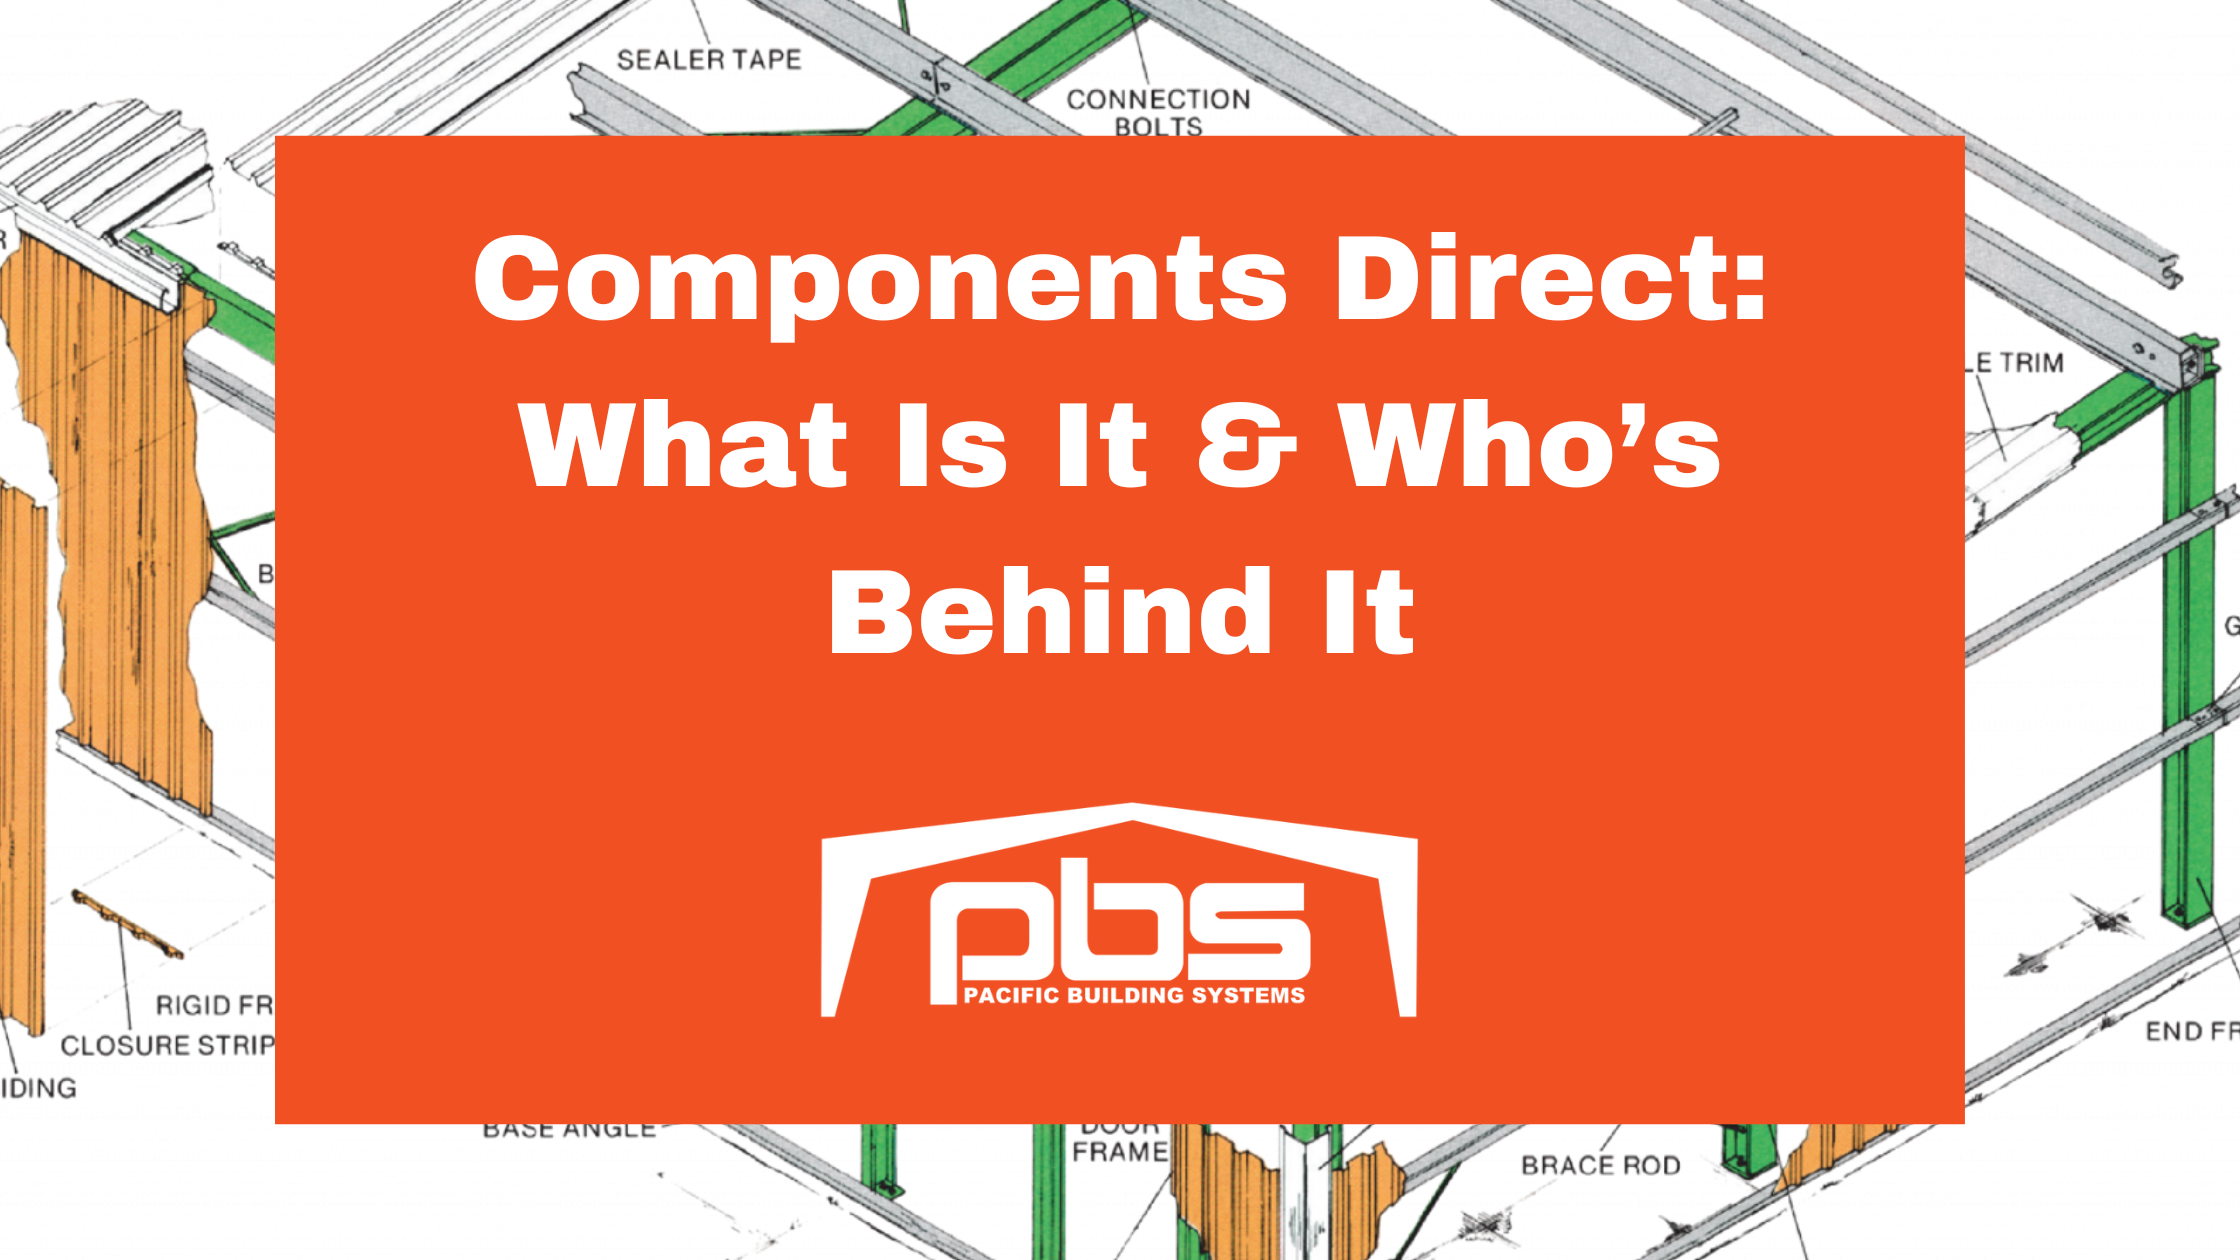 Components Direct: What Is It & Who’s Behind It